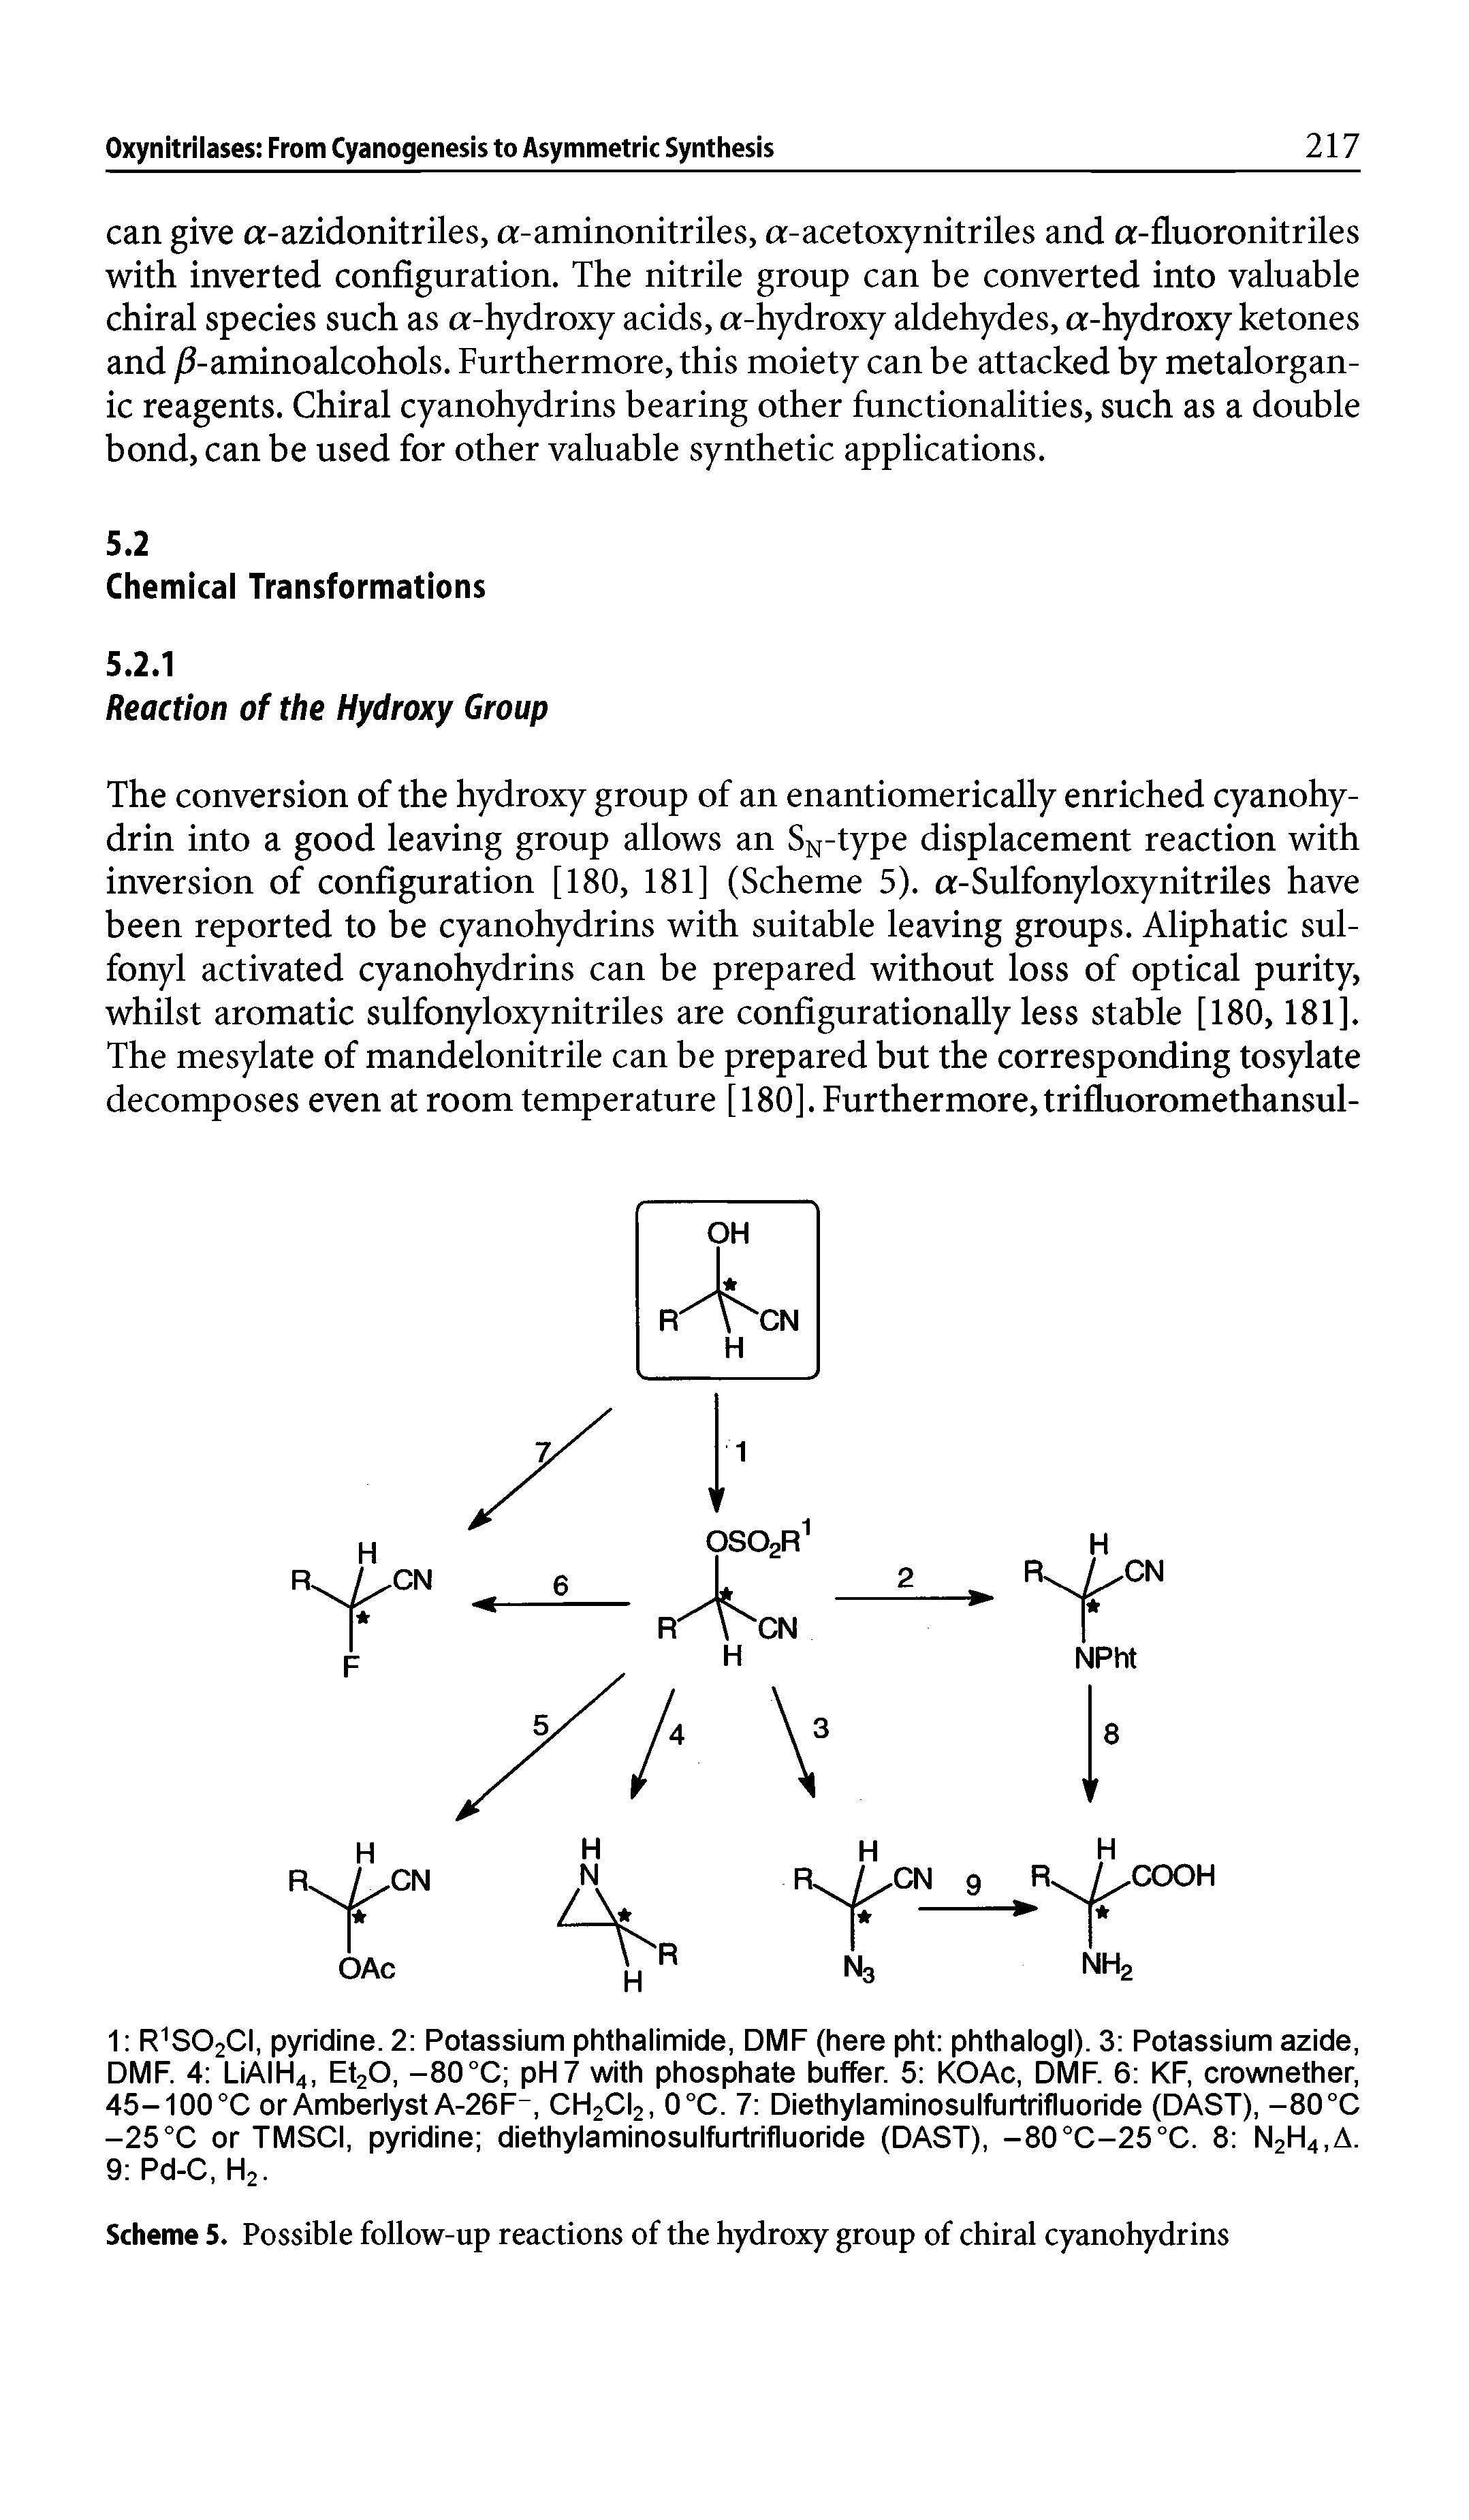 Scheme 5. Possible follow-up reactions of the hydroxy group of chiral cyanohydrins...